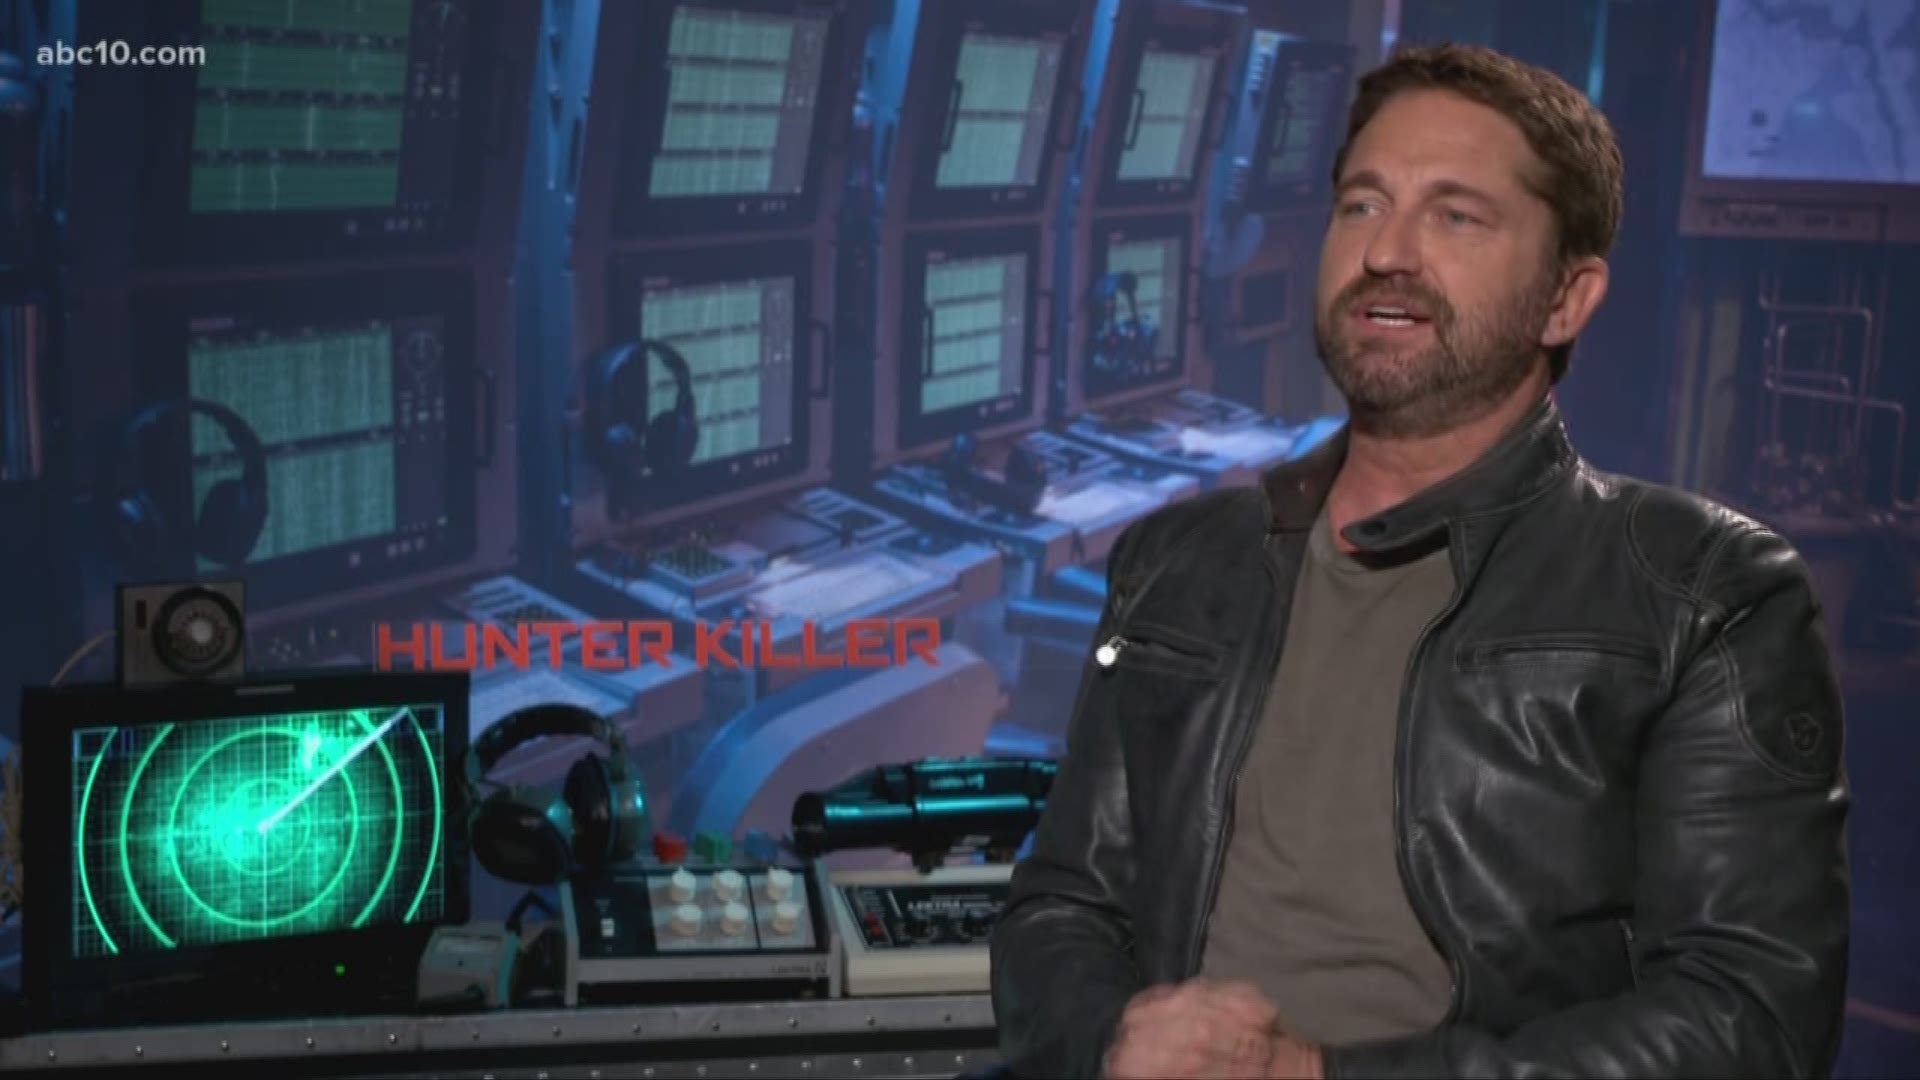 Gerard Butler sat down with the Extra Butter crew to talk about his movie "Hunter Killer" and, oddly enough, the time he lived in Sacramento.